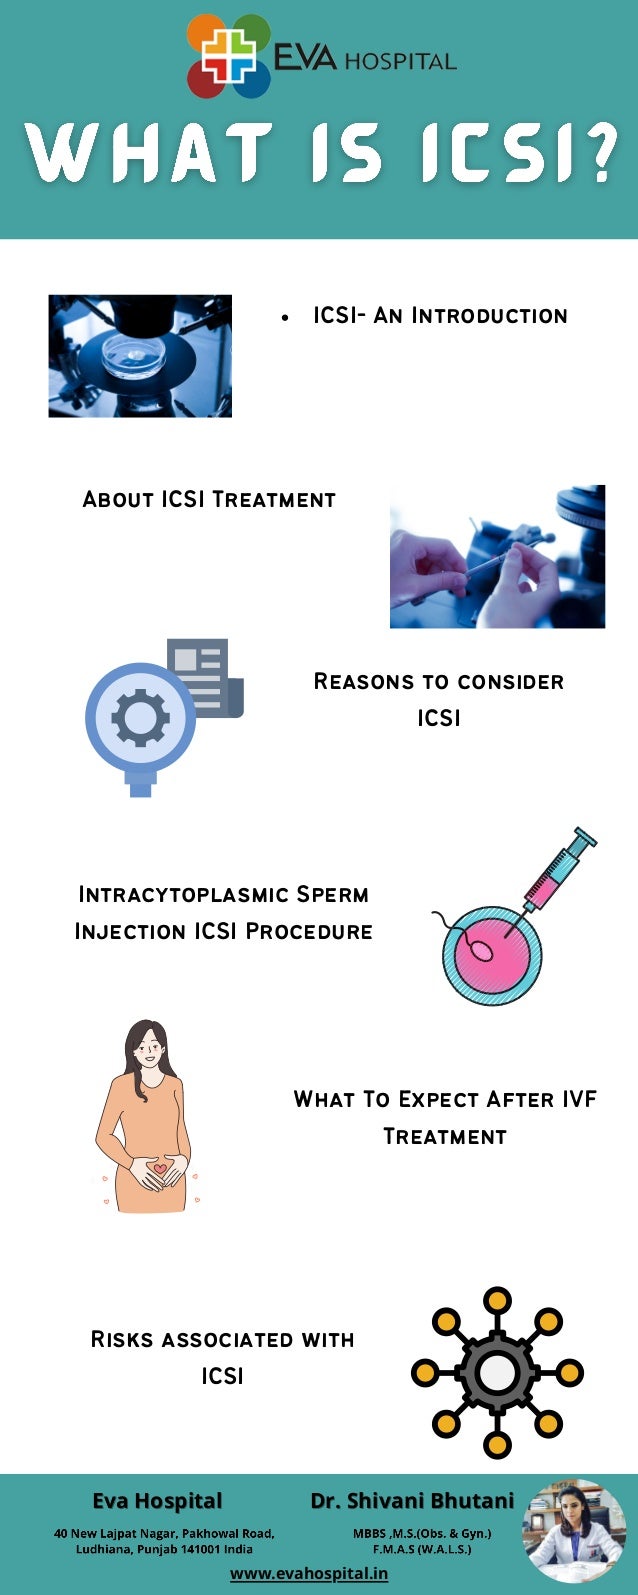 ICSI- An Introduction
About ICSI Treatment
Reasons to consider
ICSI
Intracytoplasmic Sperm
Injection ICSI Procedure


What To Expect After IVF
Treatment
Risks associated with
ICSI
Eva Hospital
Eva Hospital Dr. Shivani Bhutani
Dr. Shivani Bhutani
www.evahospital.in
 